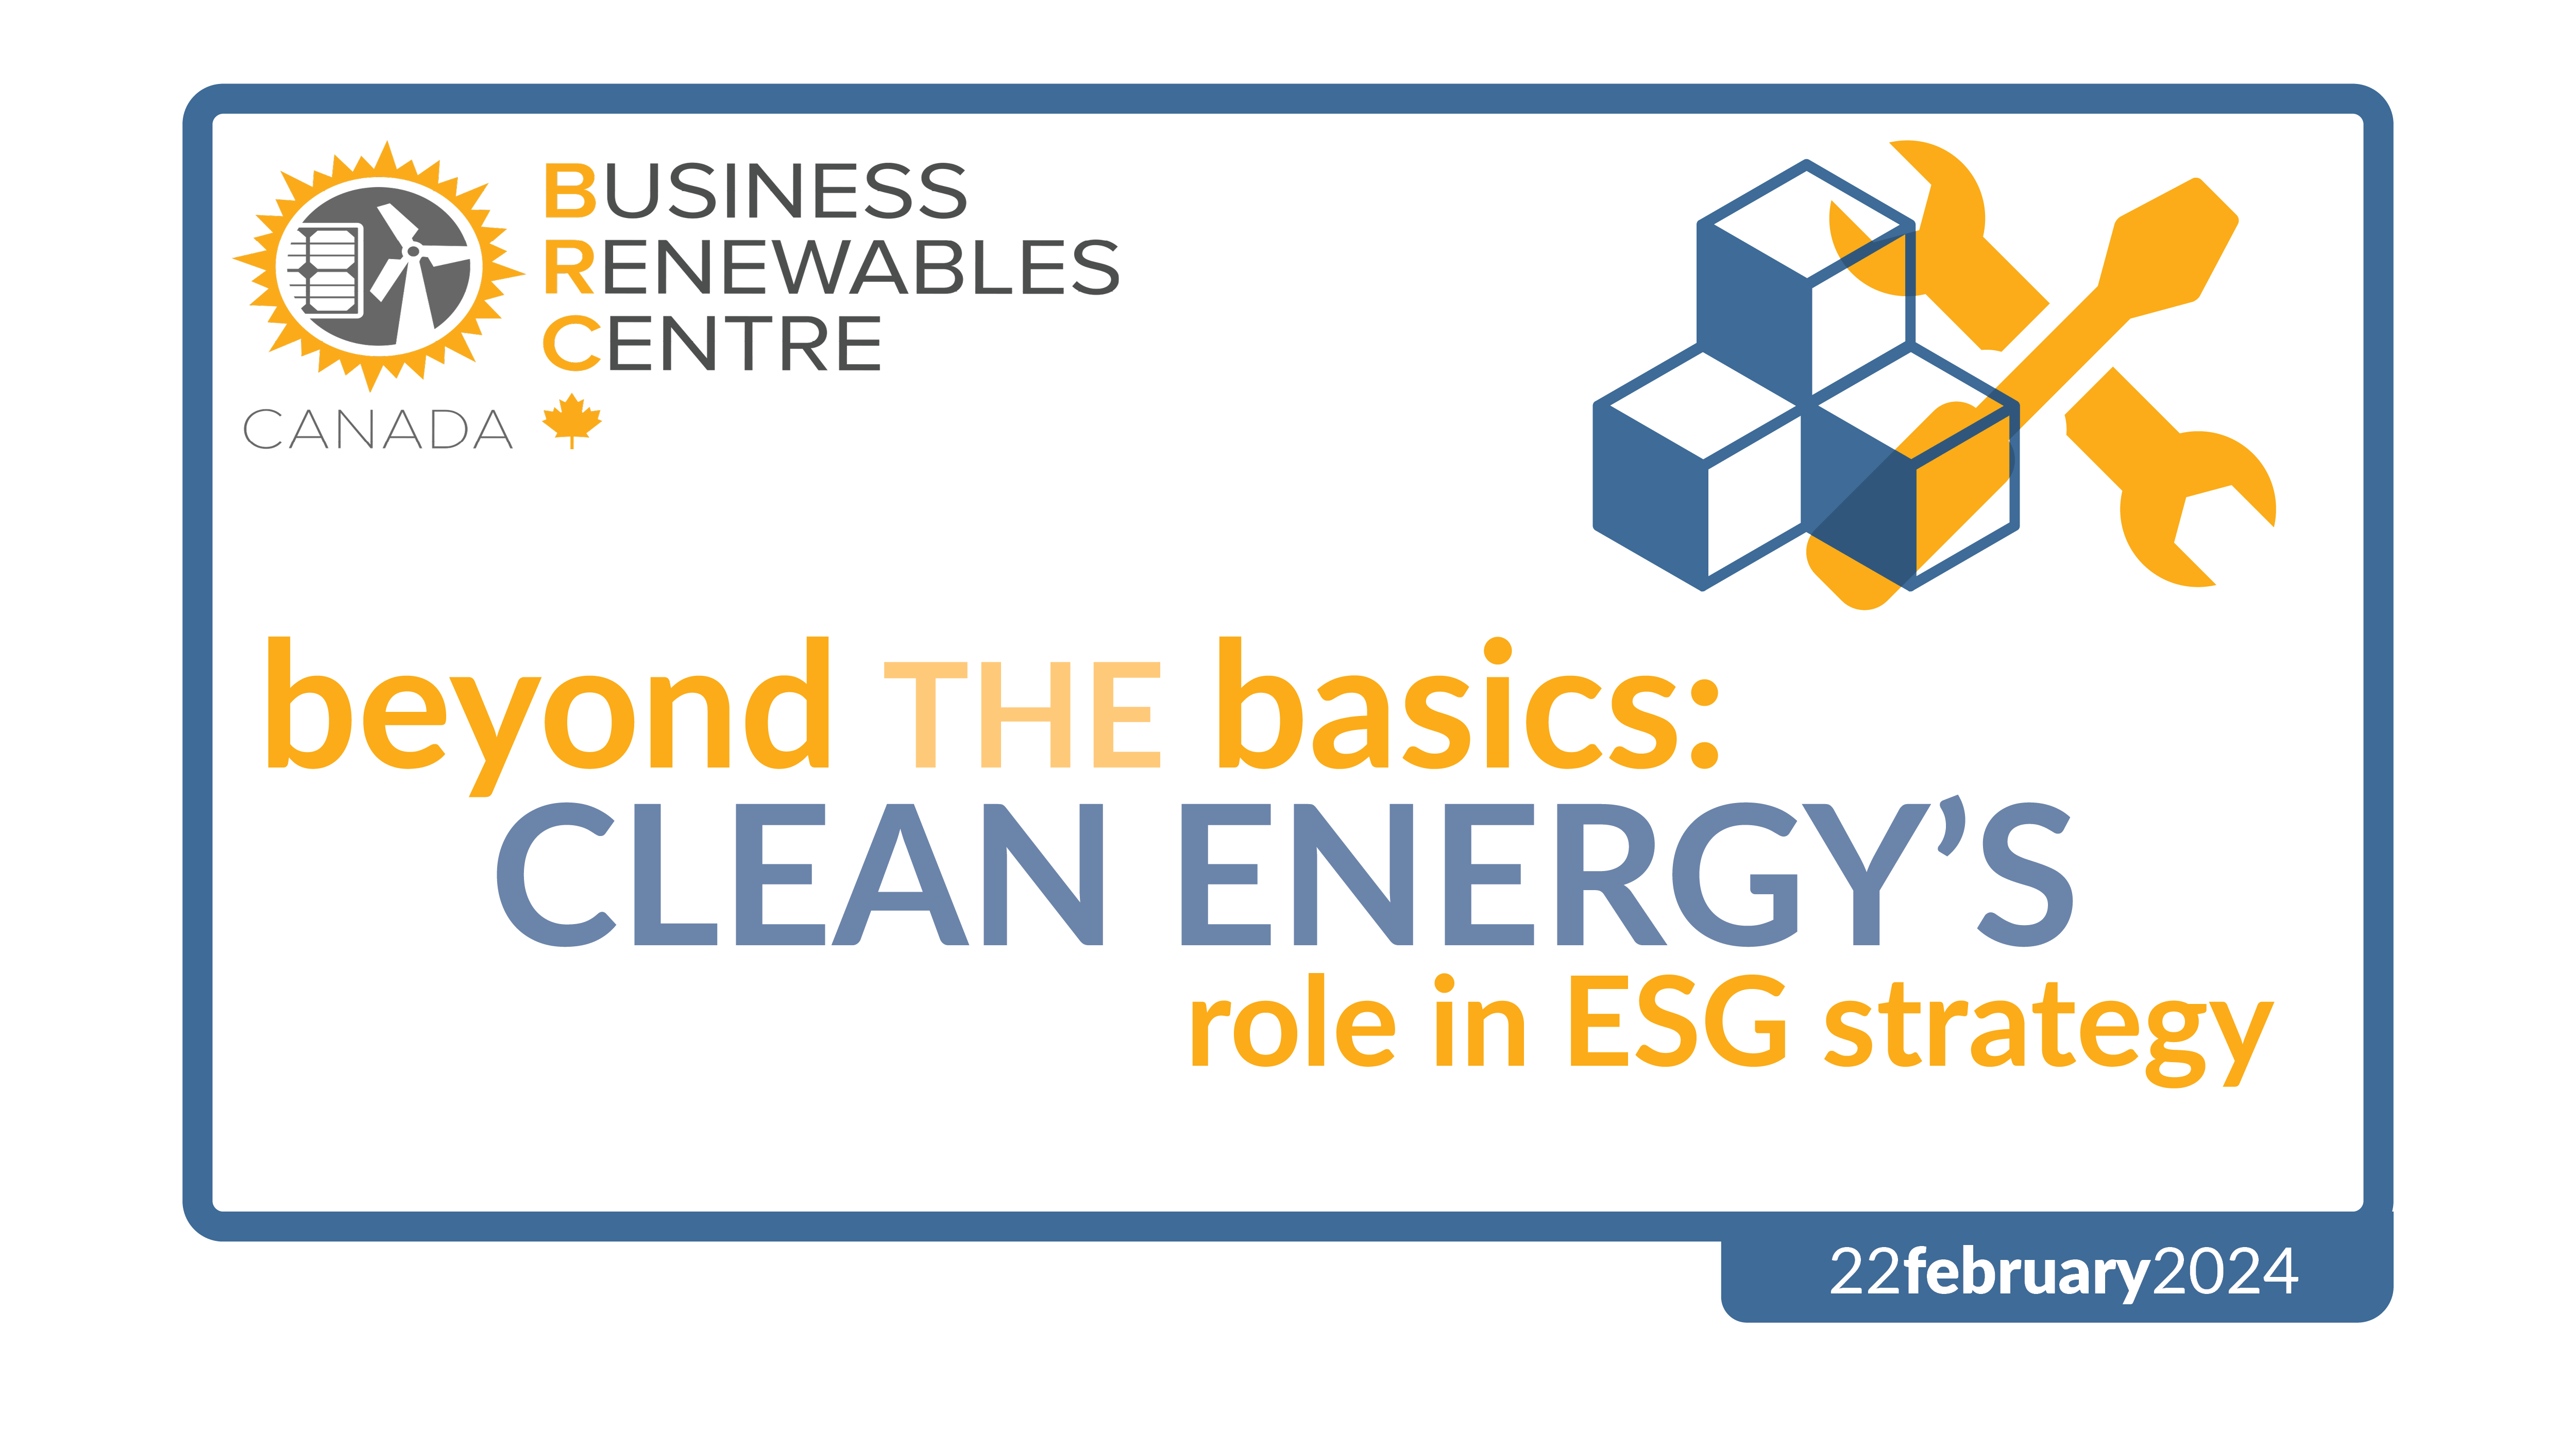 Clean energy and ESG